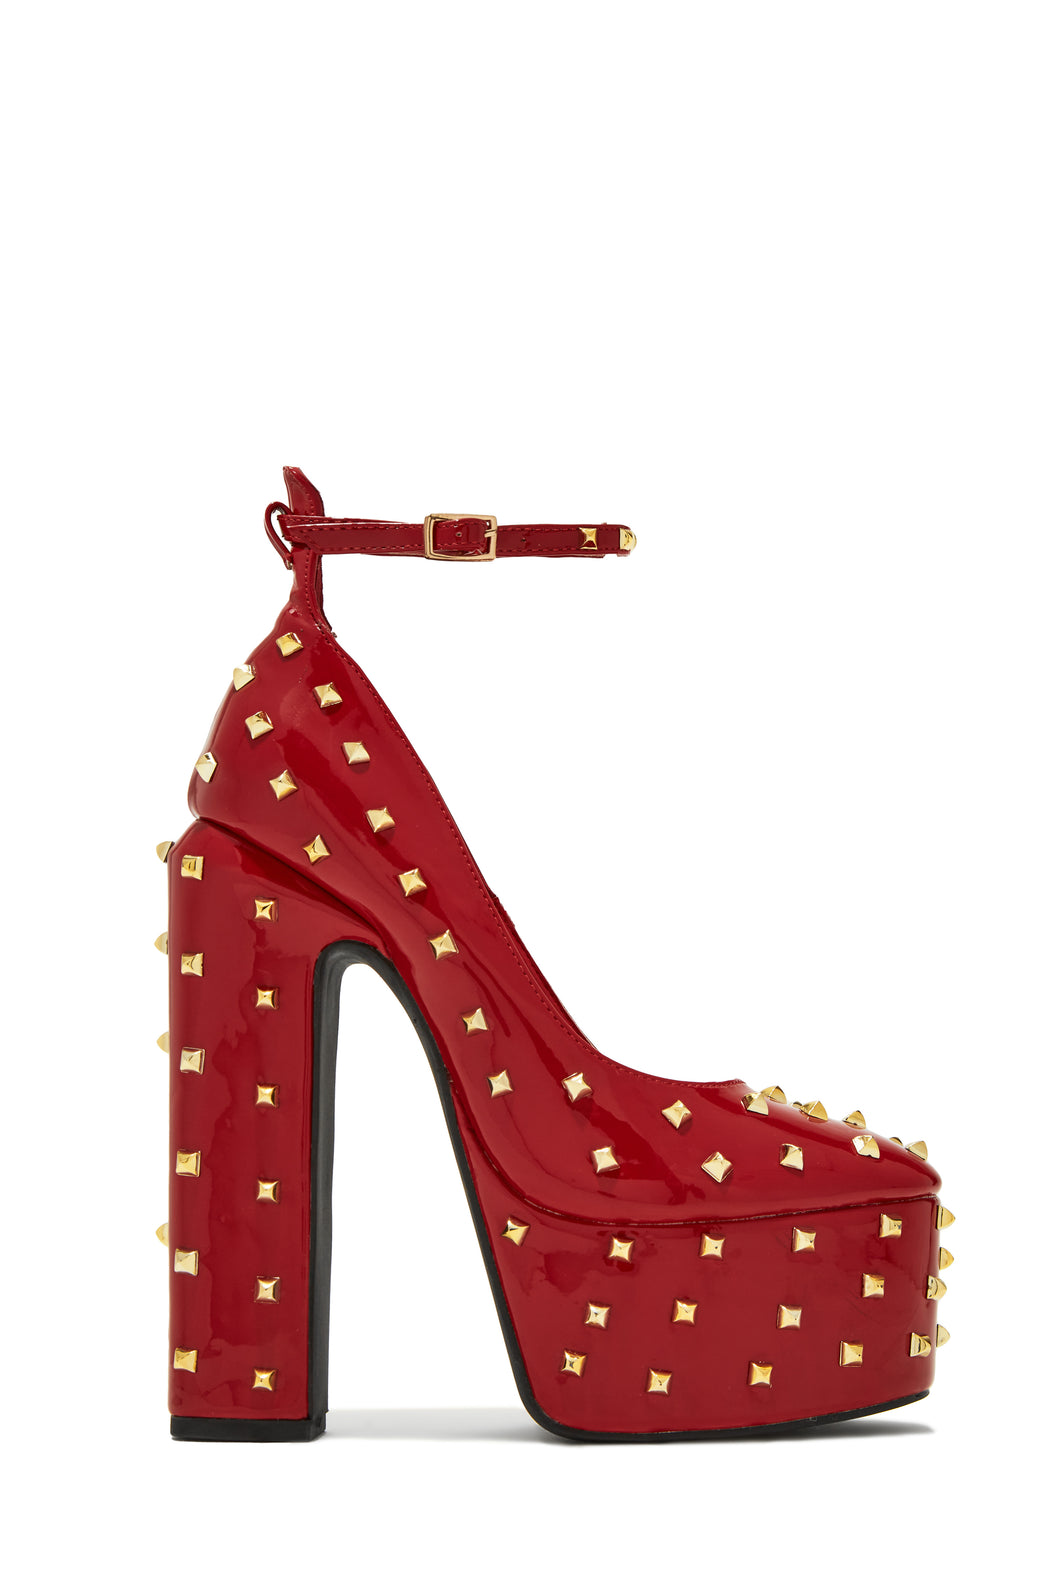 Red Studded Heels 